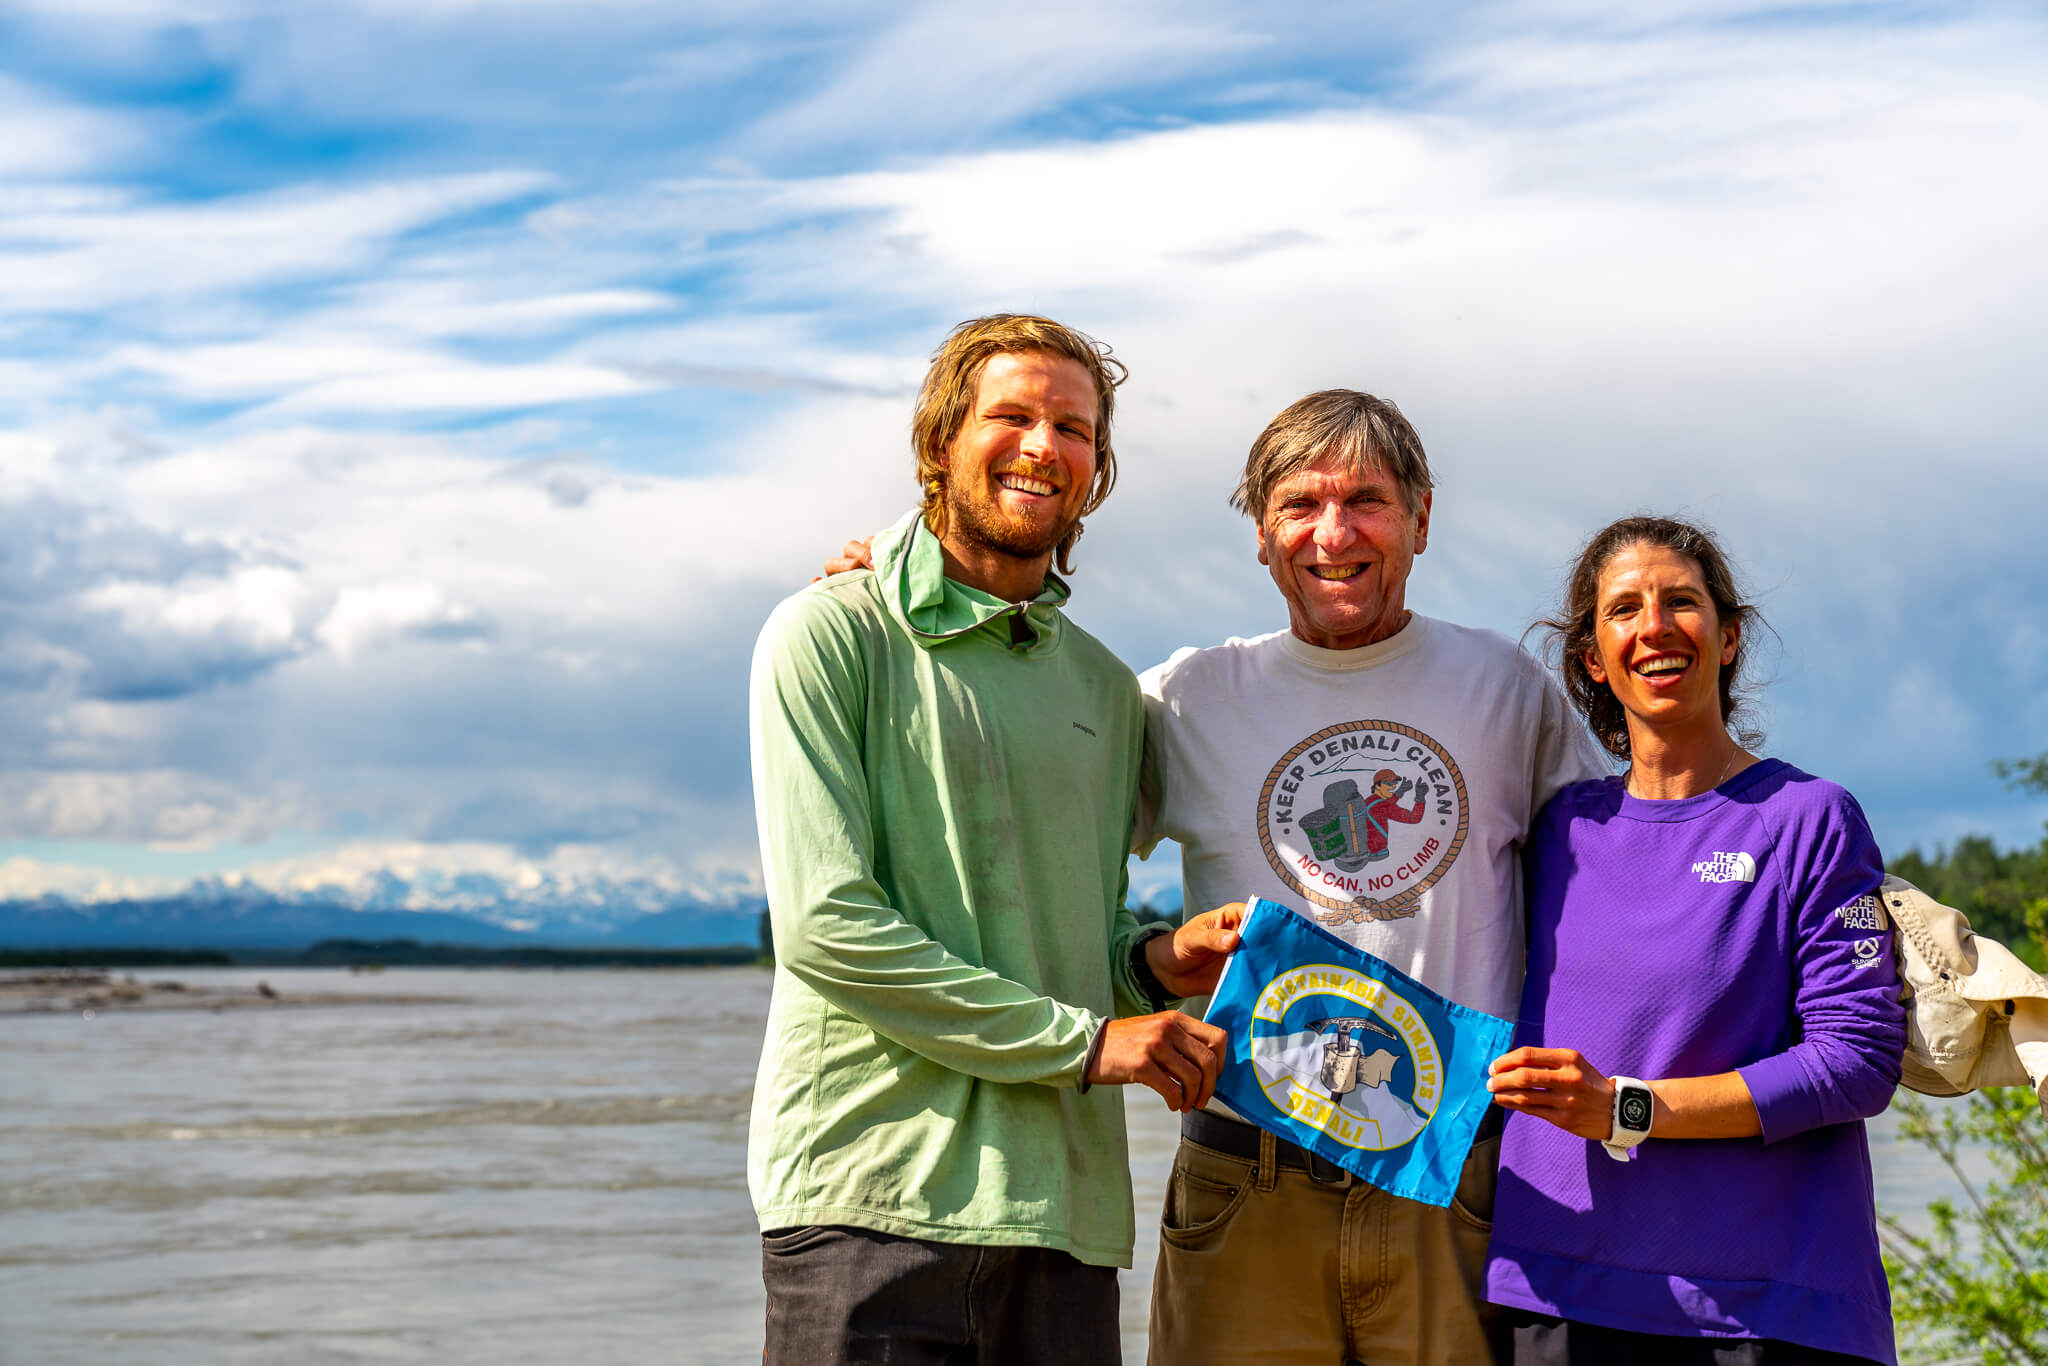 Joey Sackett, Roger Robinson, and Sophia Schwartz hold our team’s Sustainable Summits flag